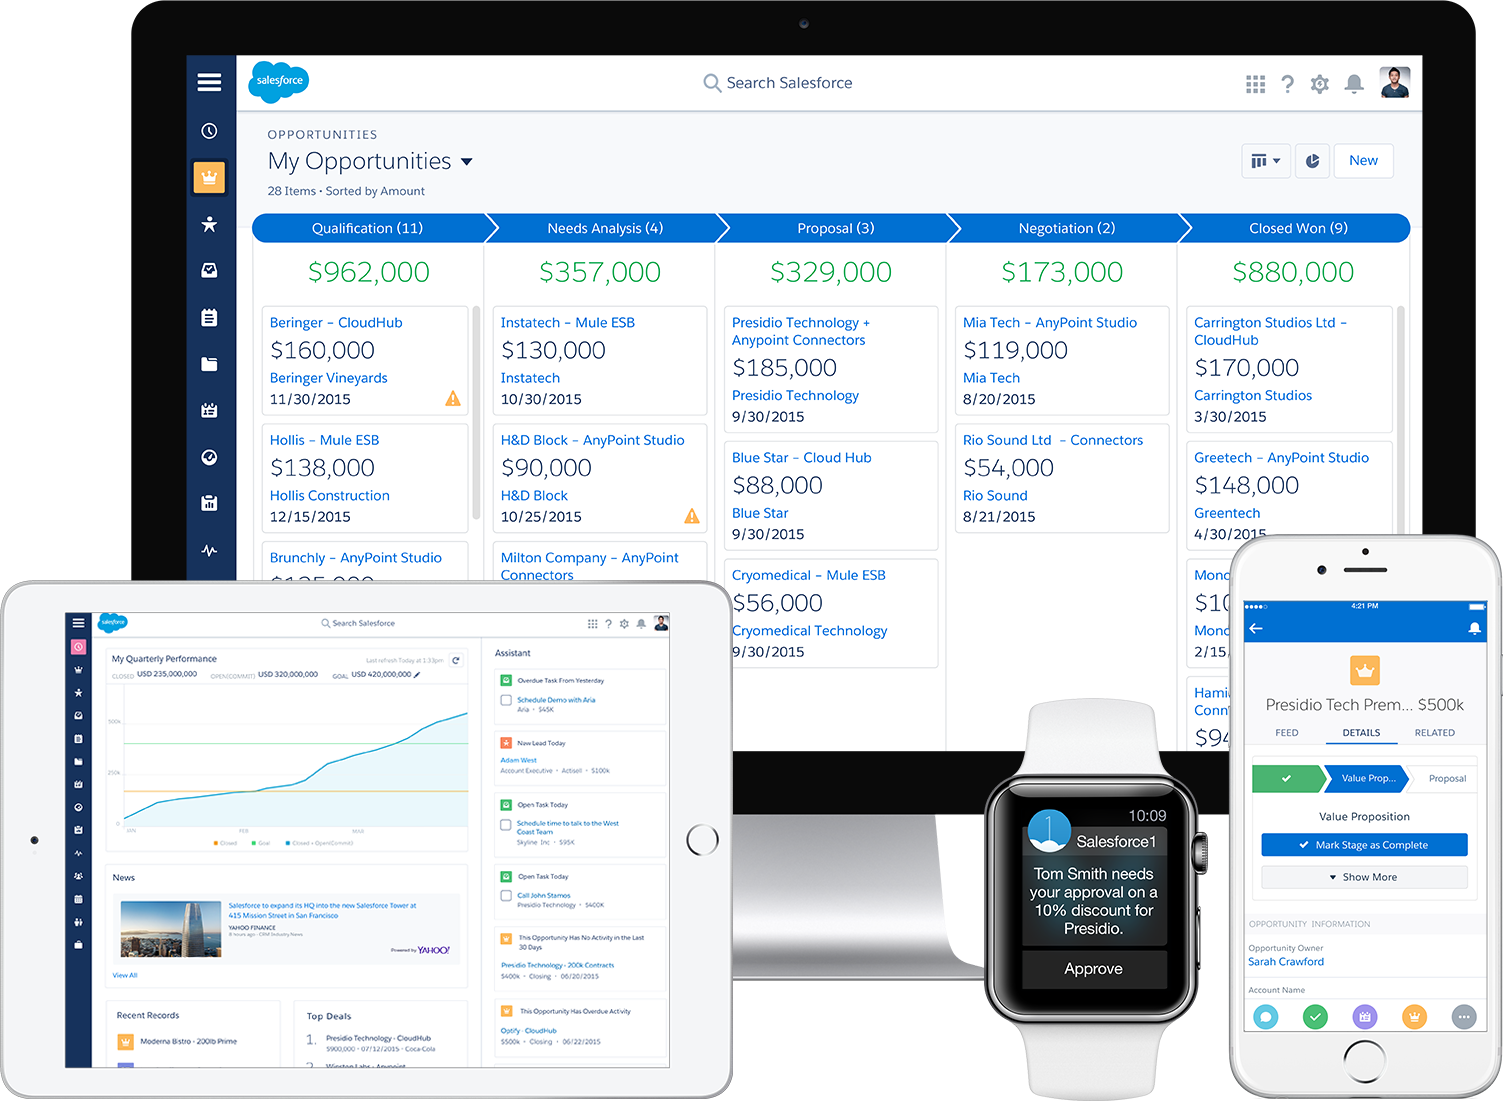 How salesforce will look with it's new UI on different devices